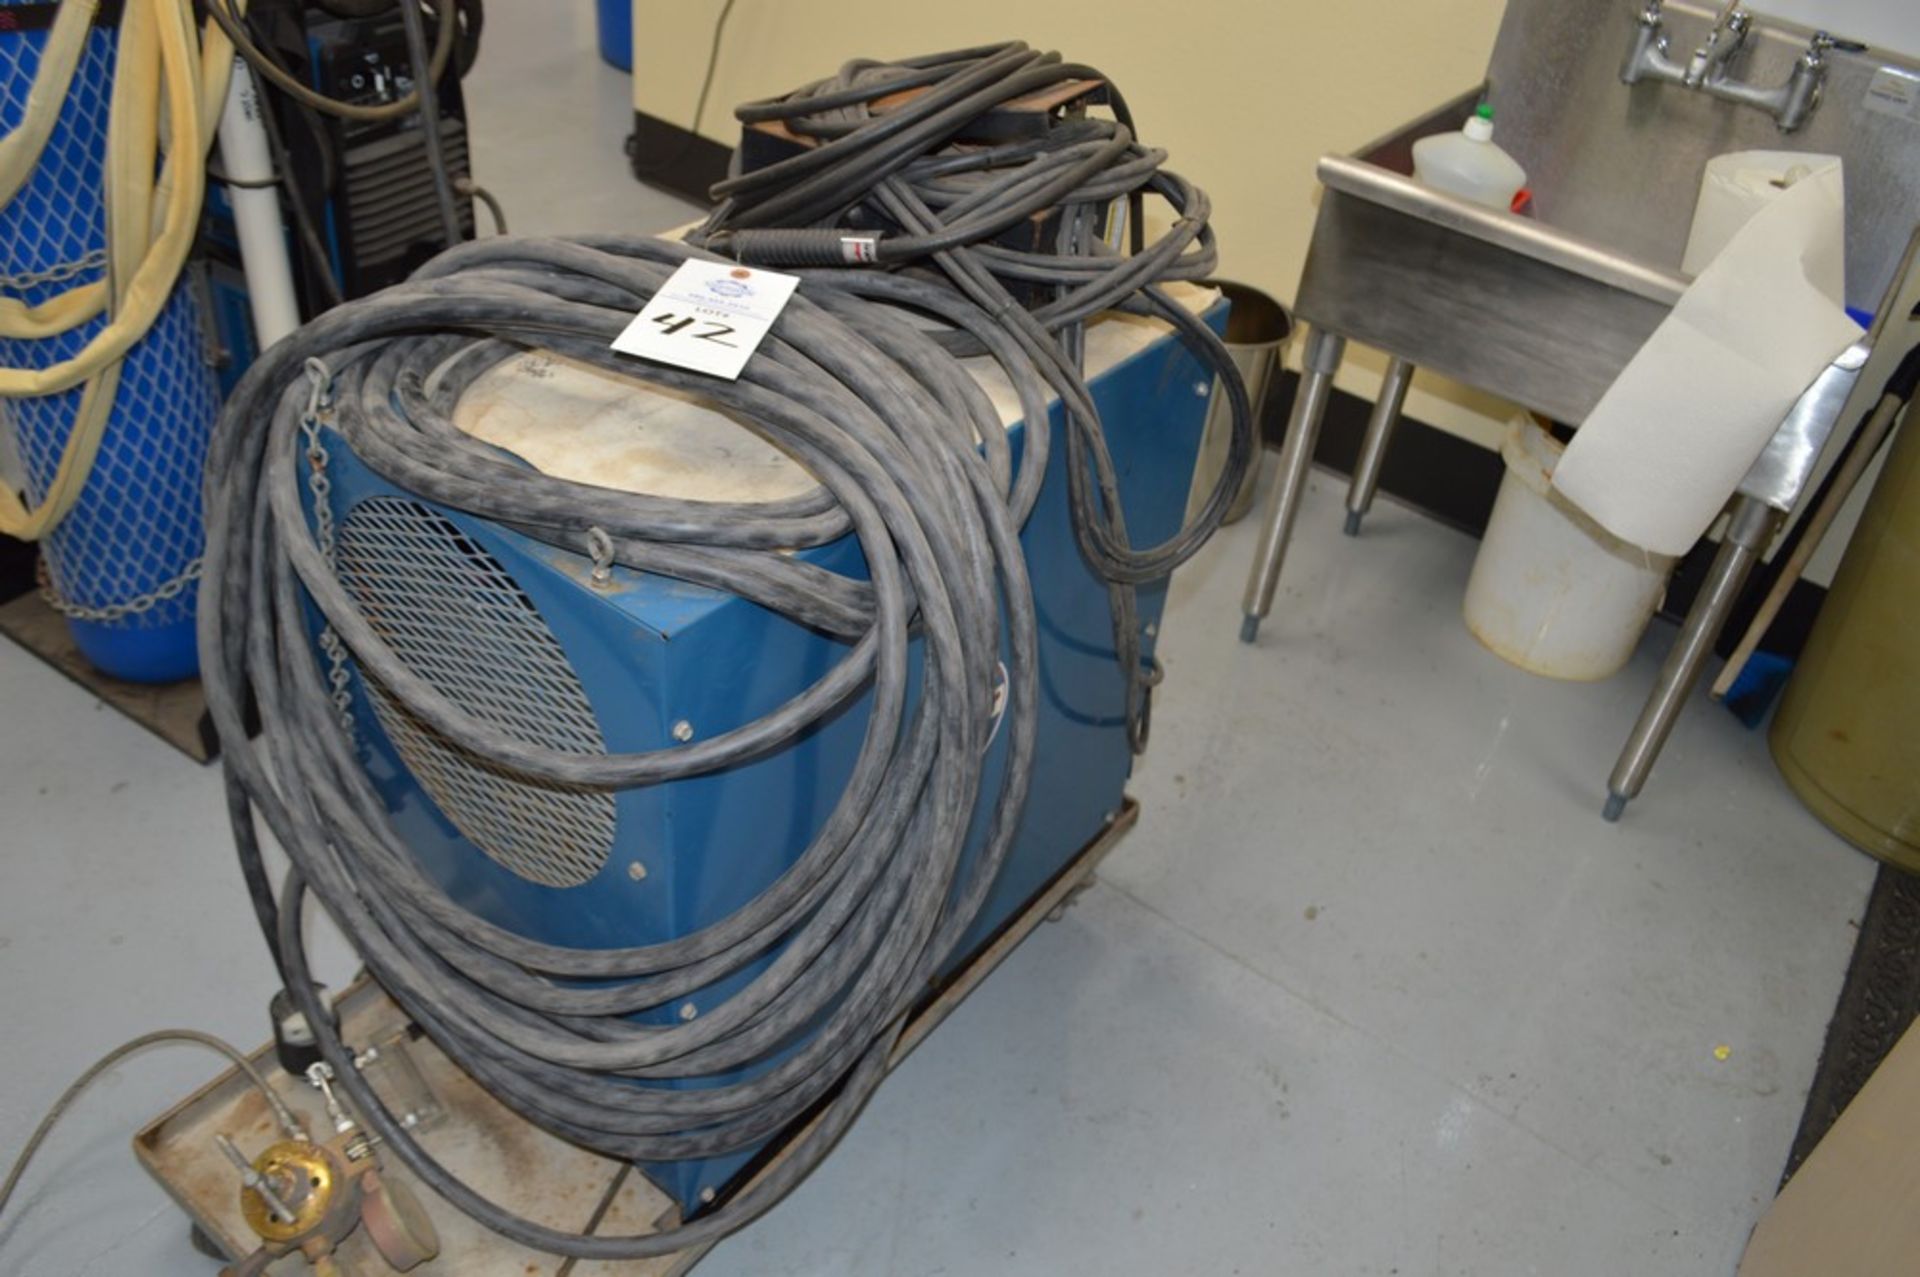 Miller SR-150-32 DC Welder on metal rolling cart, foot pedal and gas lines included - Image 2 of 5